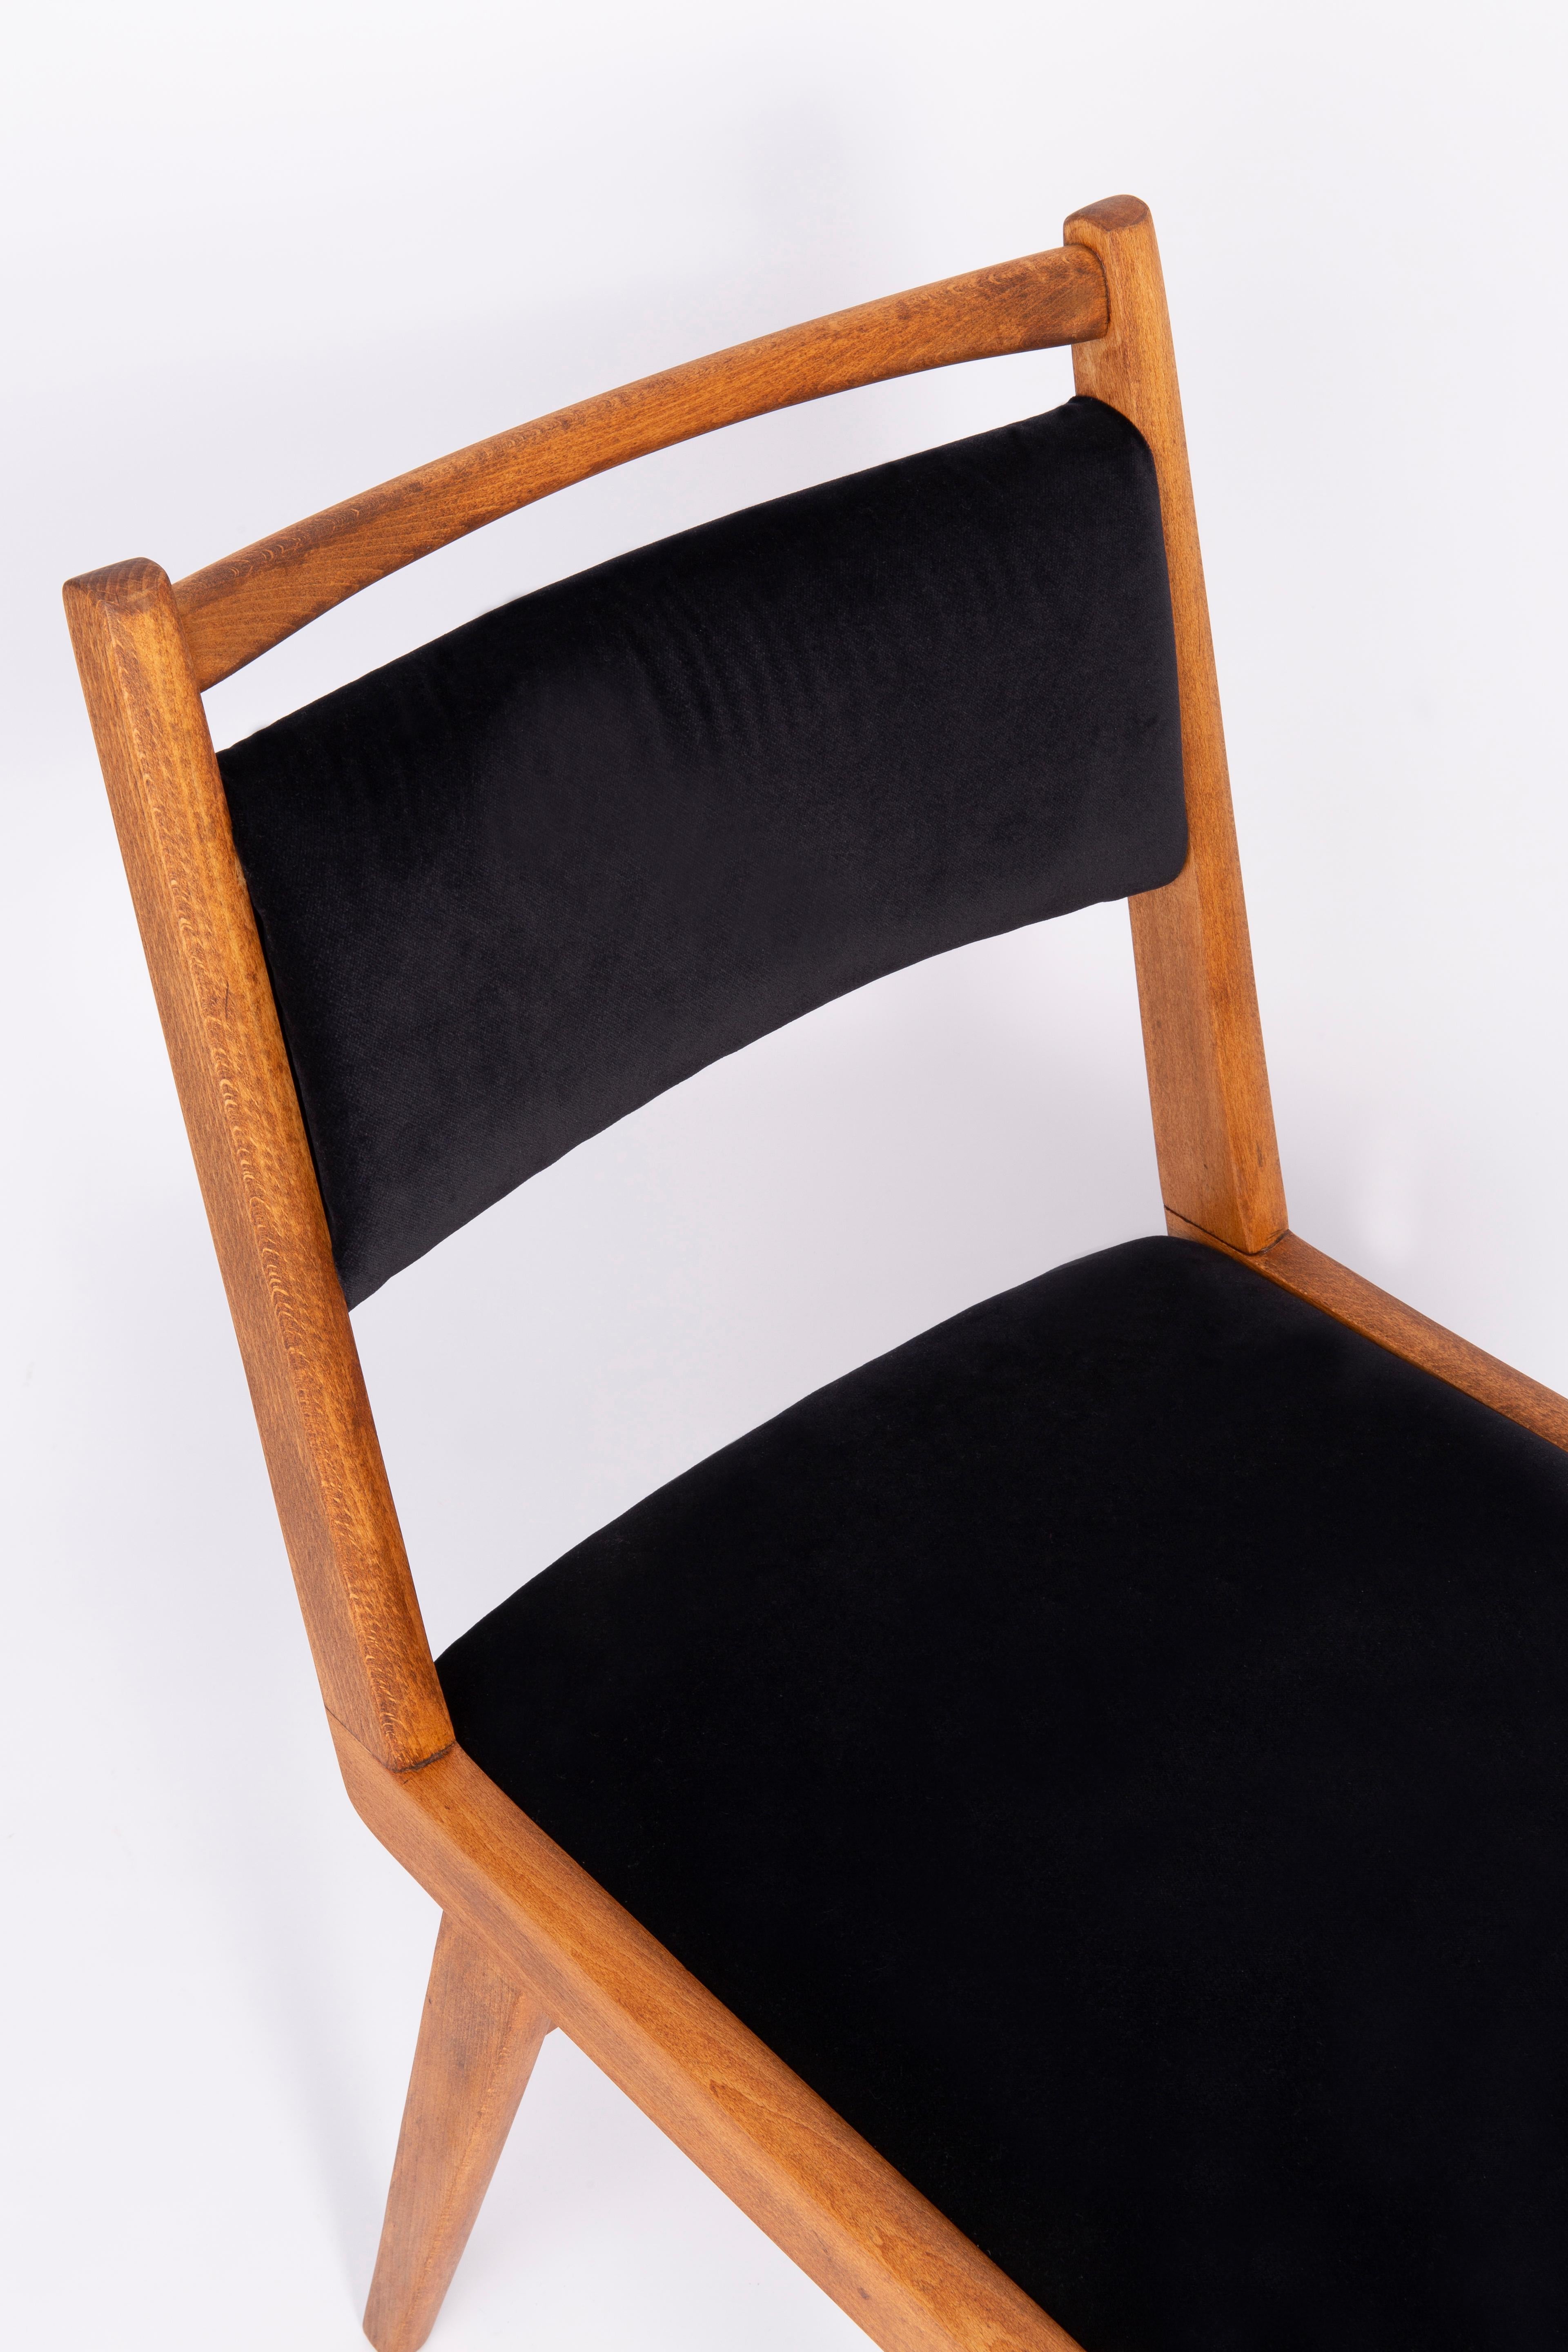 Chairs designed by Prof. Rajmund Halas. It is JAR type model. Made of beechwood. Chairs are after a complete upholstery renovation, the woodwork has been refreshed. Seat and back is dressed in a black and red, durable and pleasant to the touch